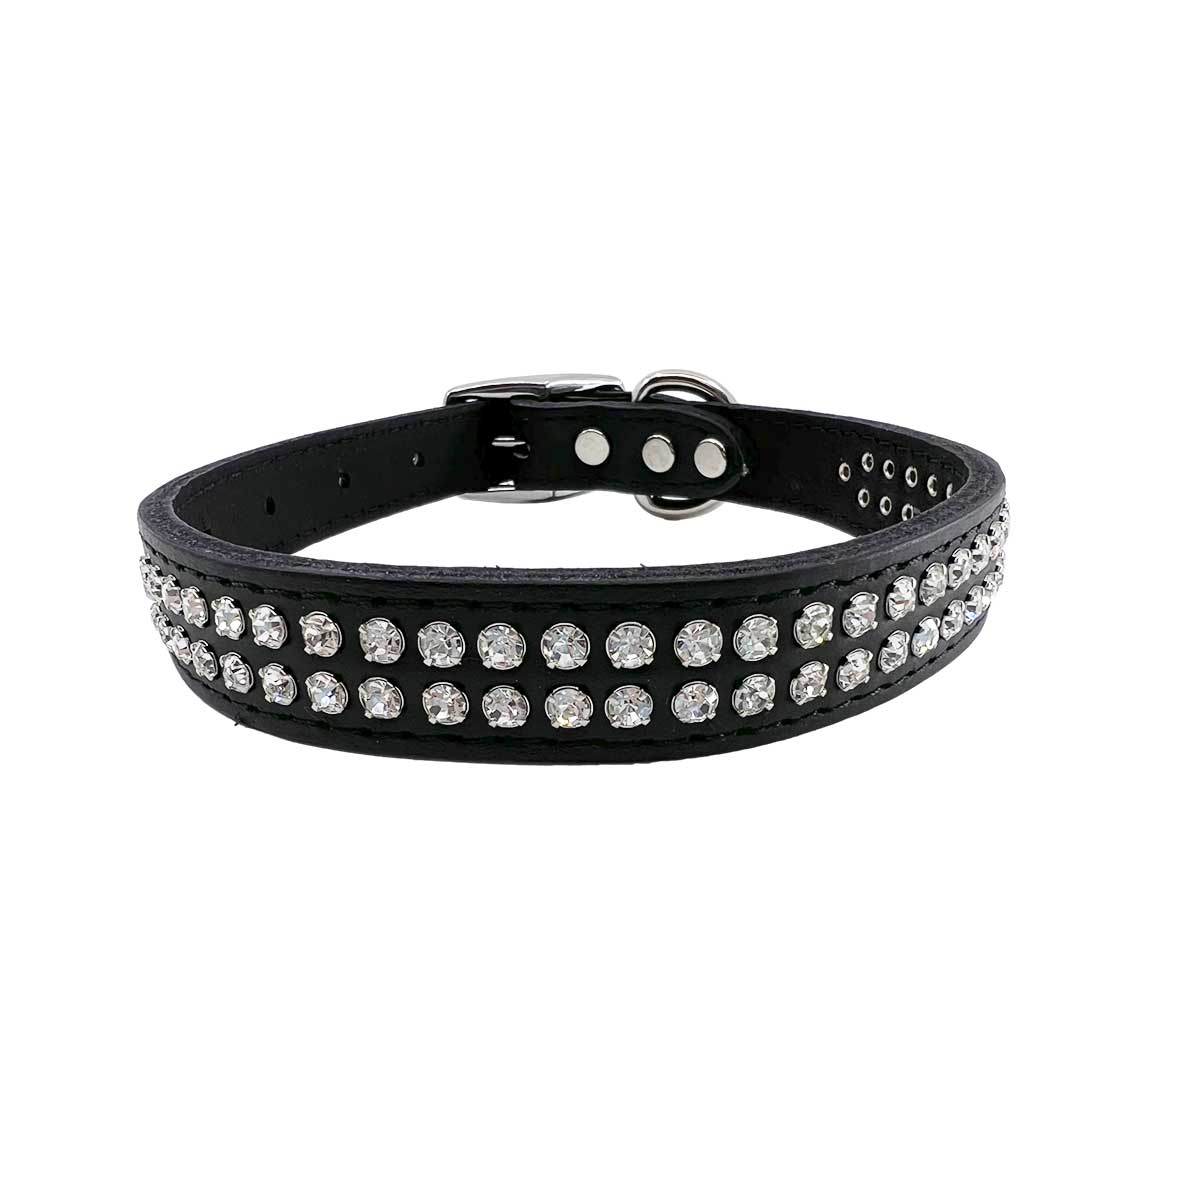 Fancy Jeweled Leather Collar in Black